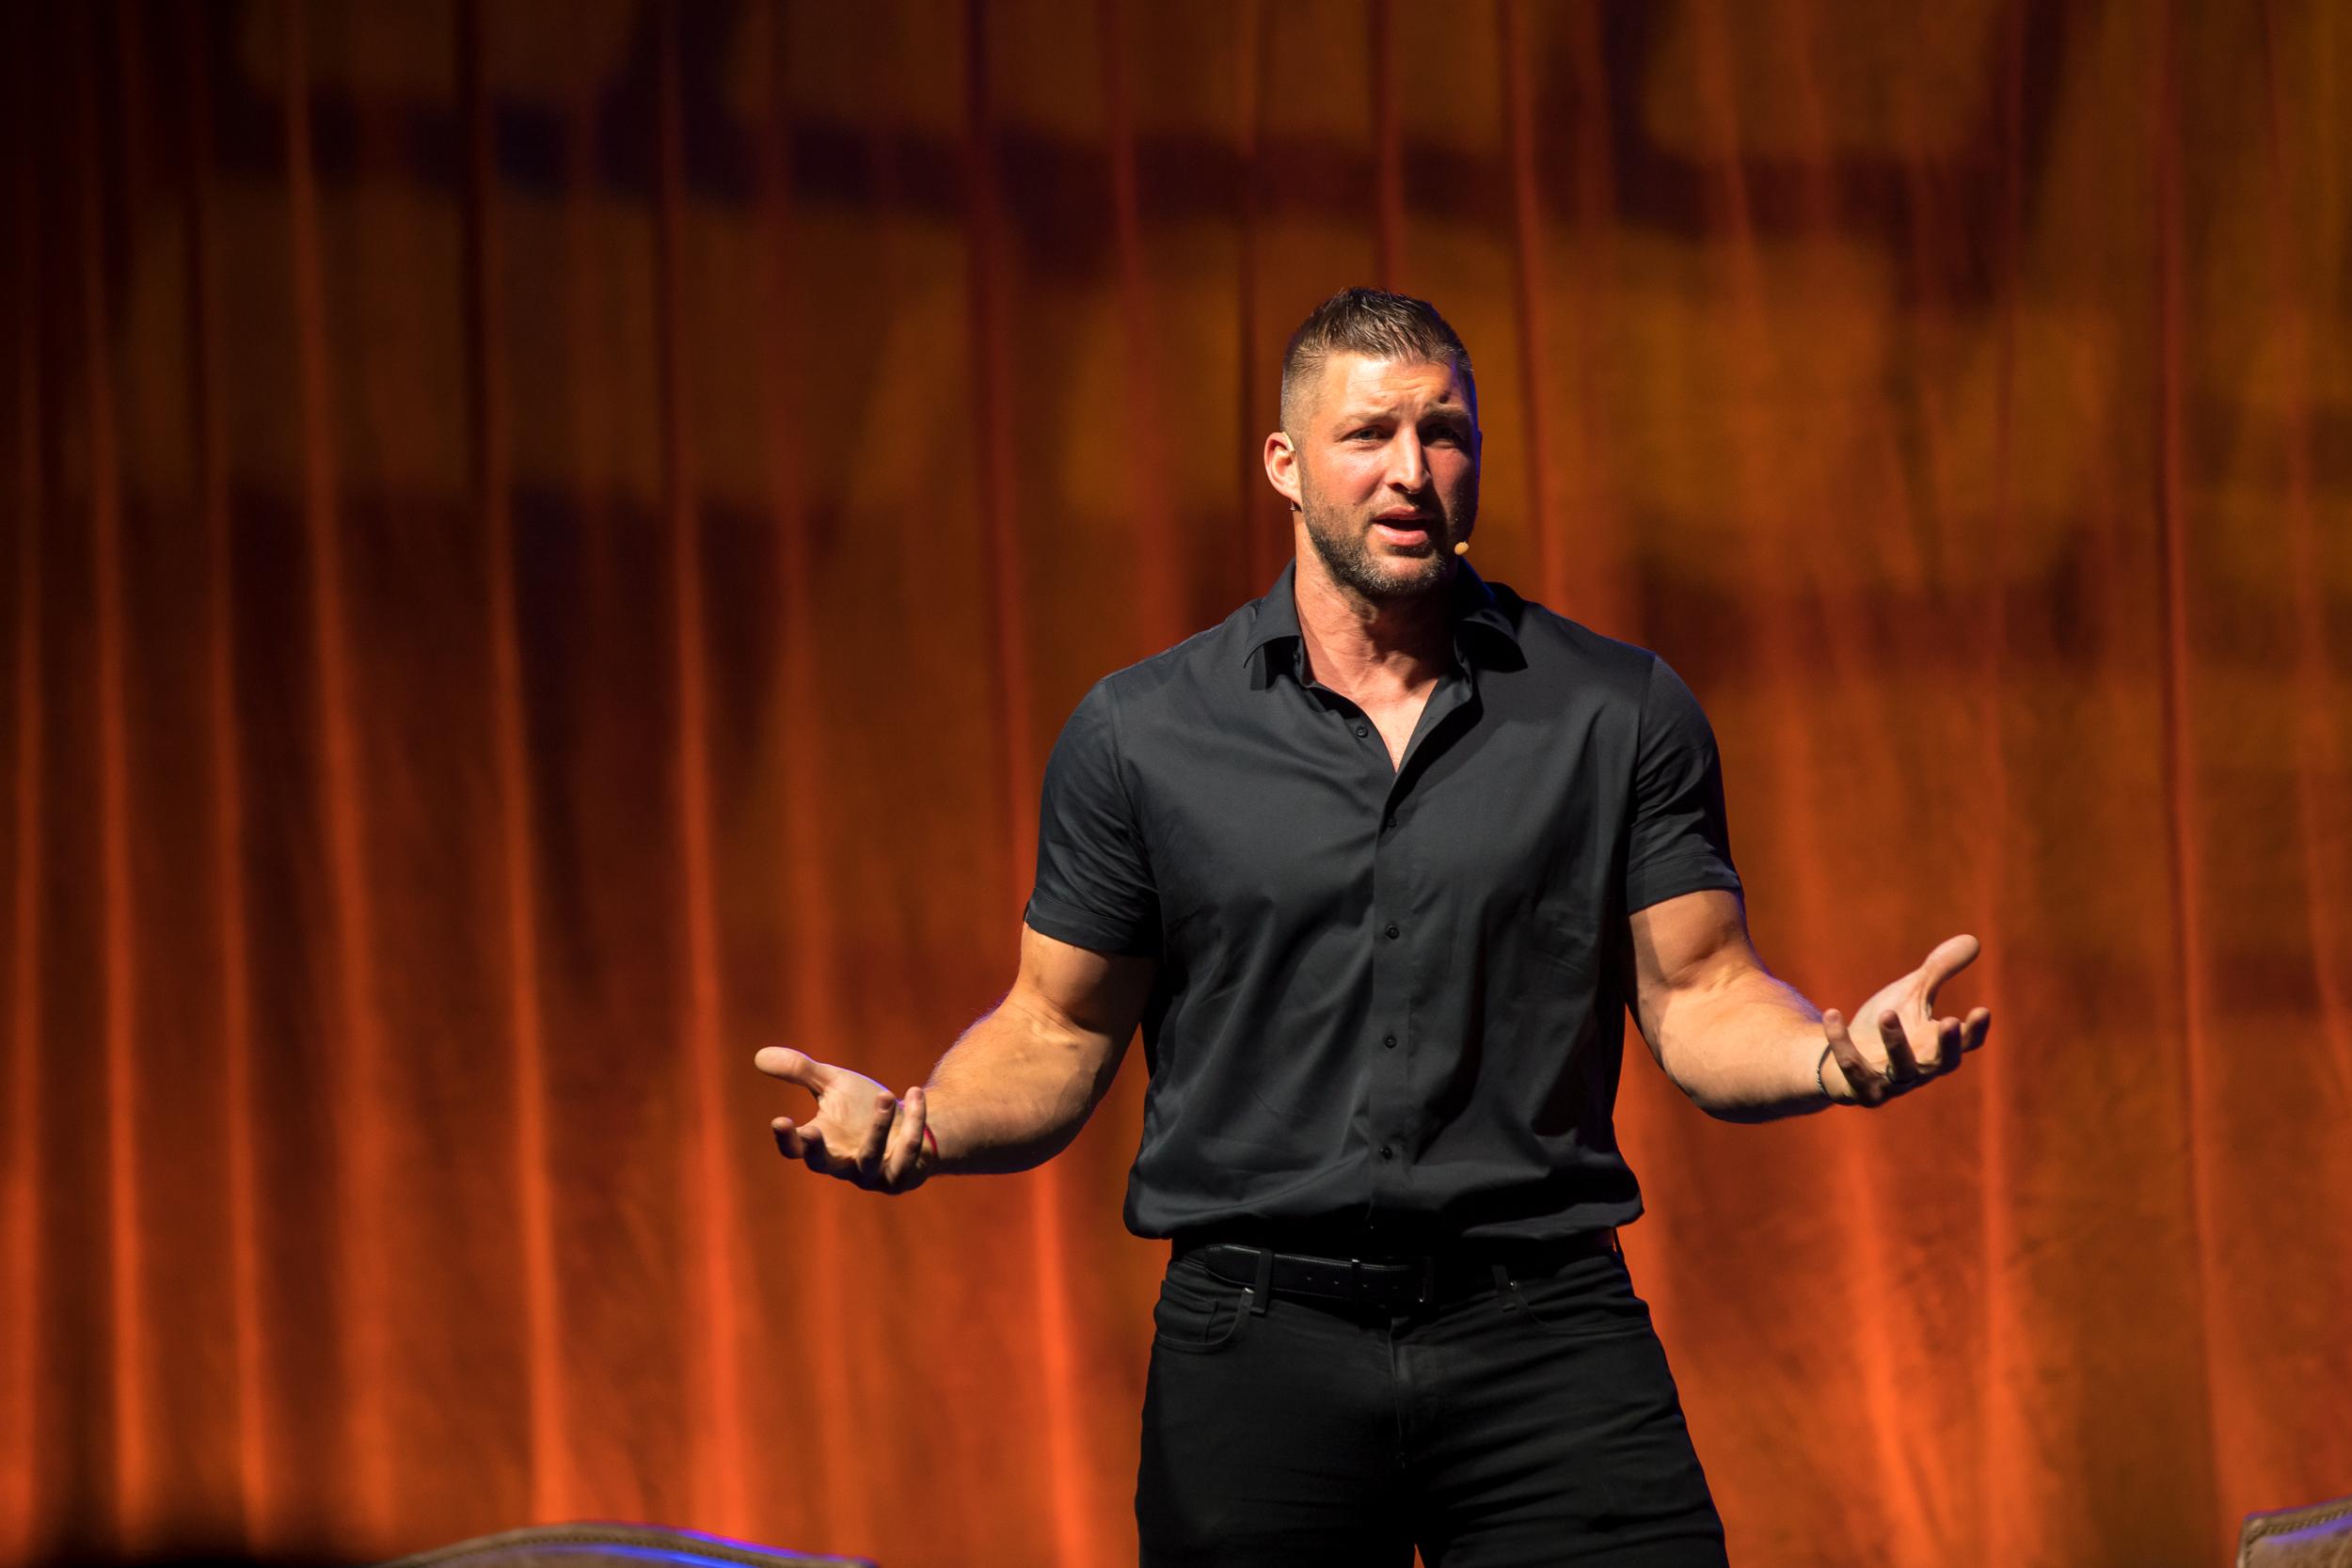 Tim Tebow speaks at an event on OSU's campus